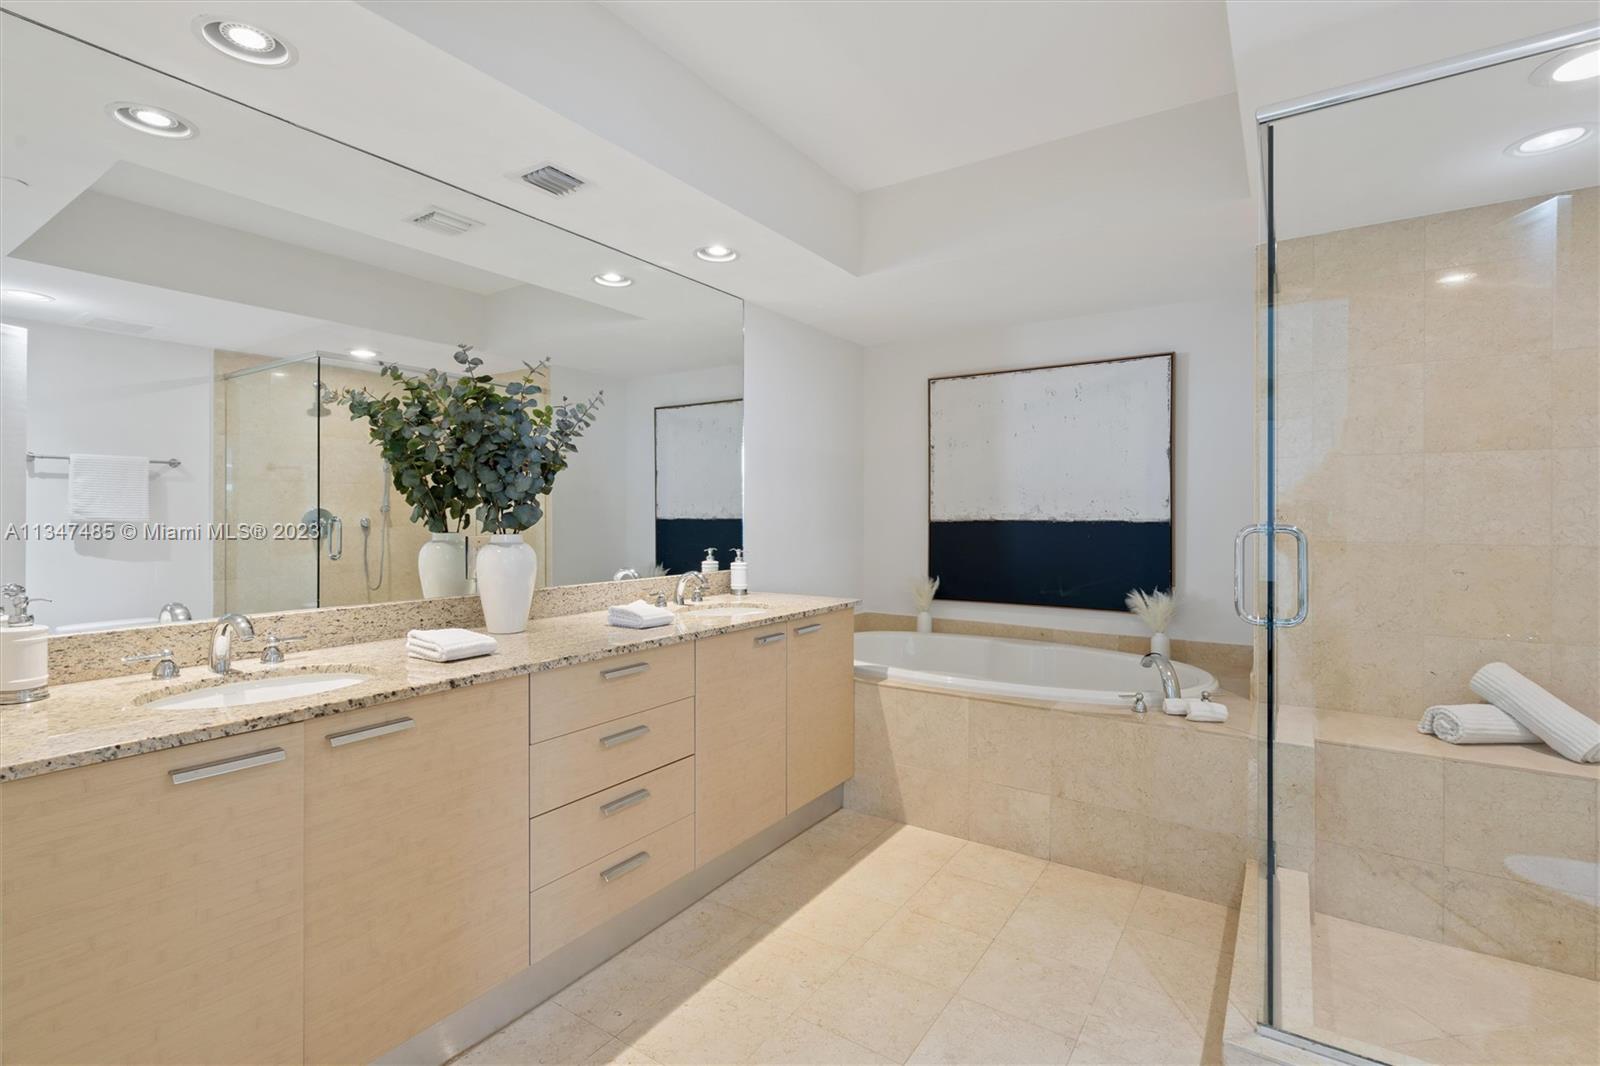 Master Bathroom with shower and whirpool tub
